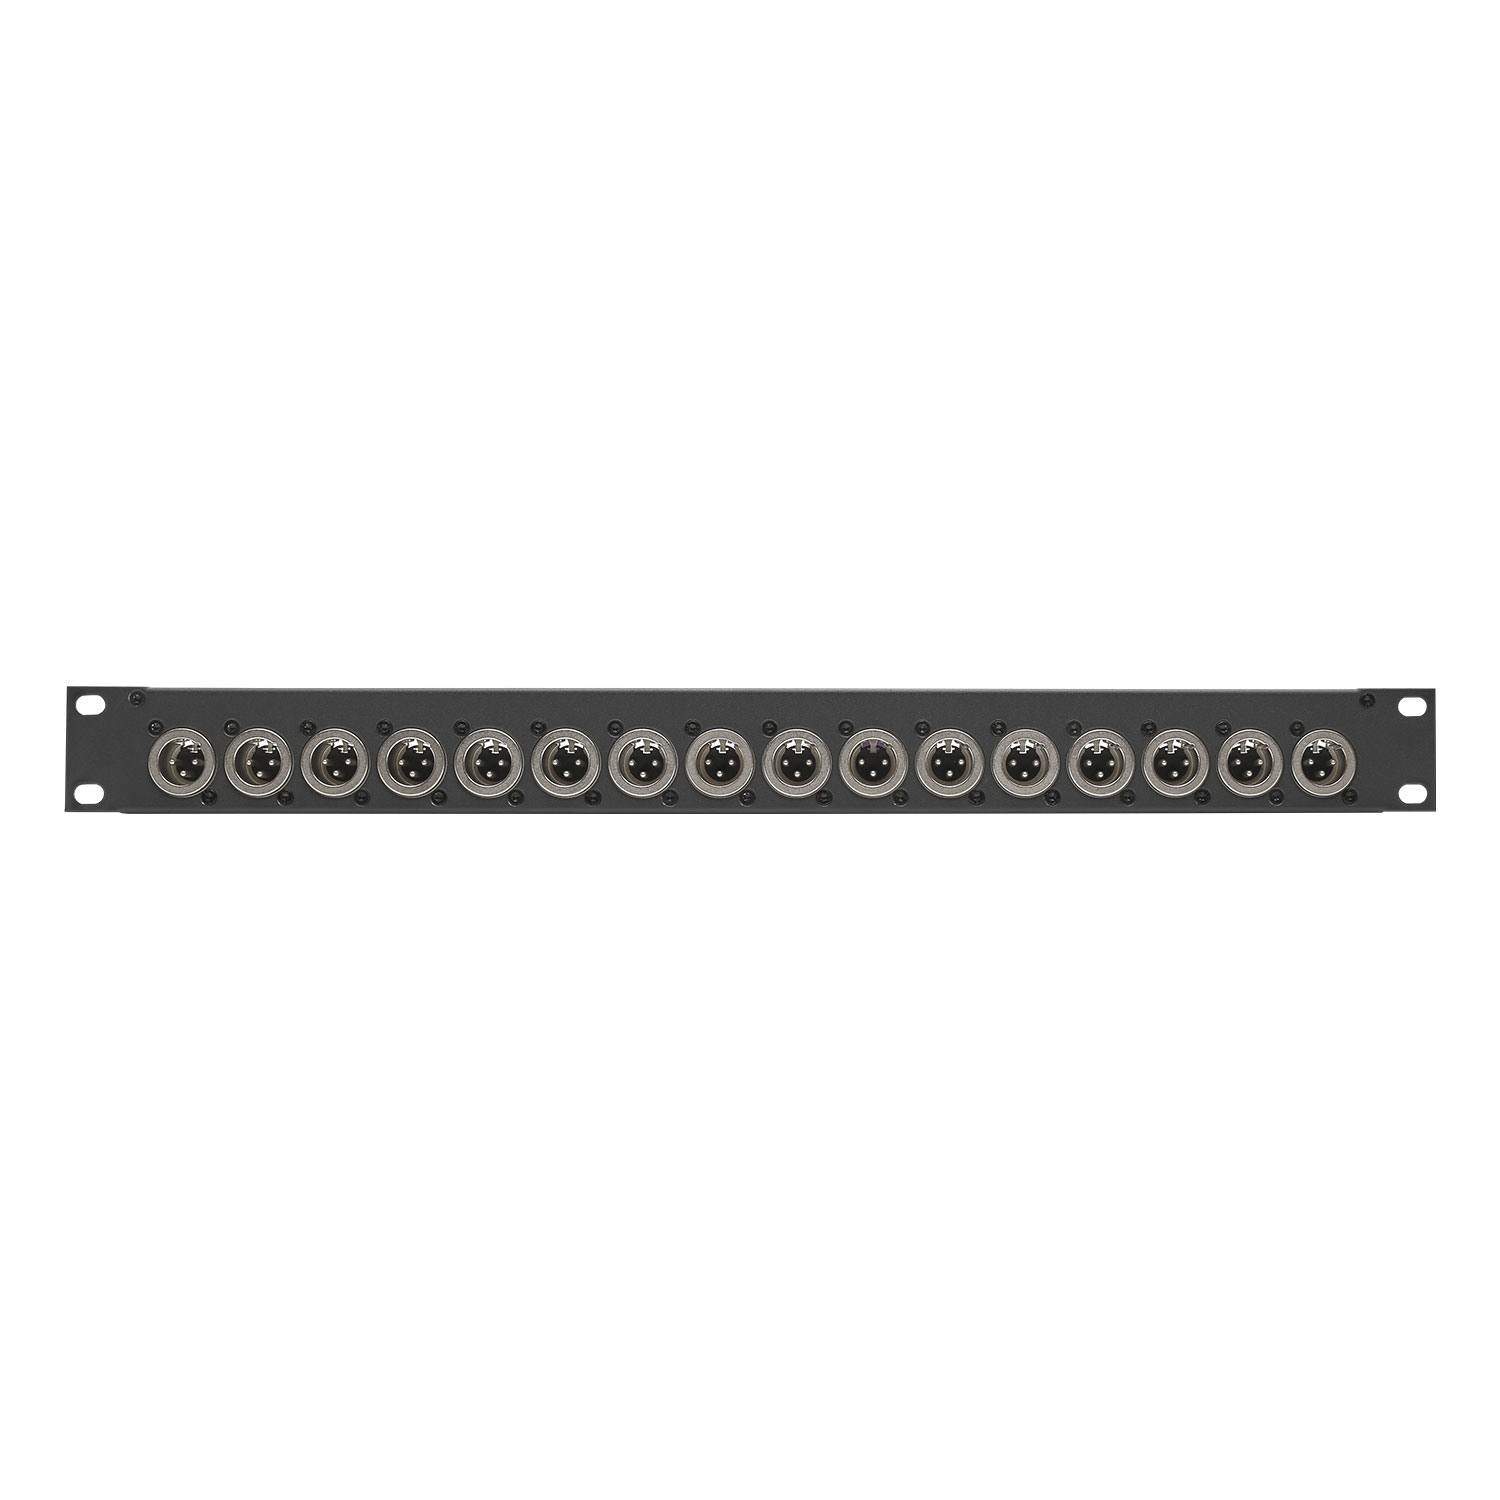 Sommer cable Audio-connection panel XLR , 2 HE, 12 BE, XLR 3-pole female/XLR 3-pole male; NEUTRIK®; Silver plated contacts, 1.5 mm steel panel, colour: anthracite